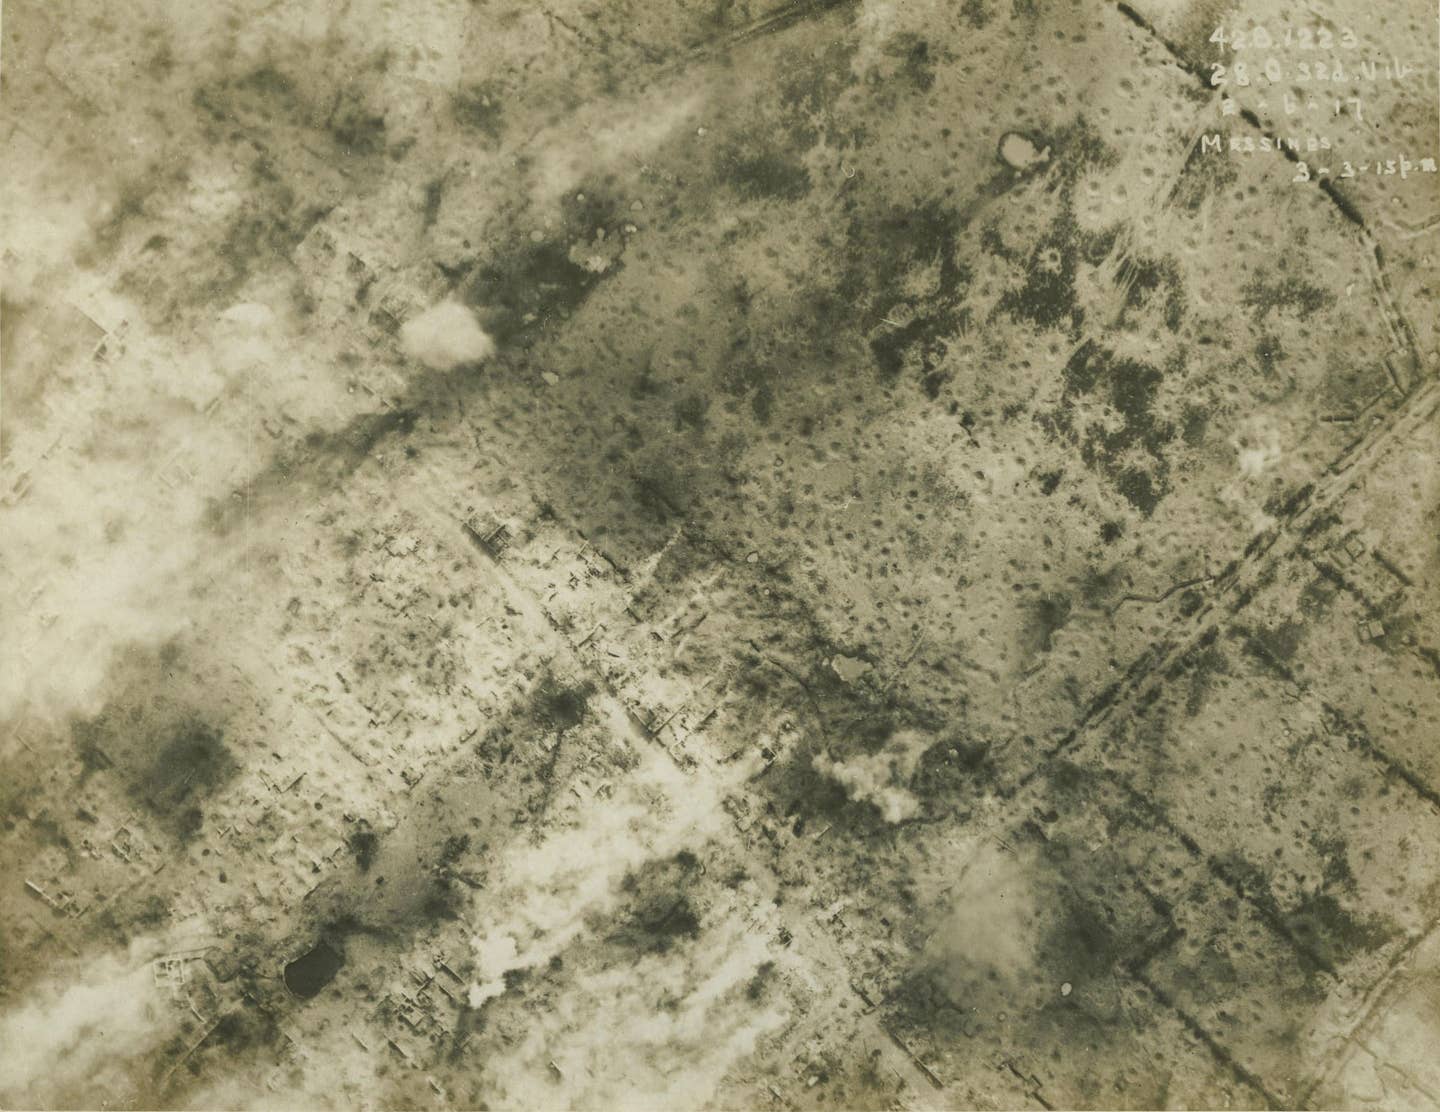 An aerial view of Messines. June 2, 1917. <em>Royal Air Force/Wikimedia Commons.</em>